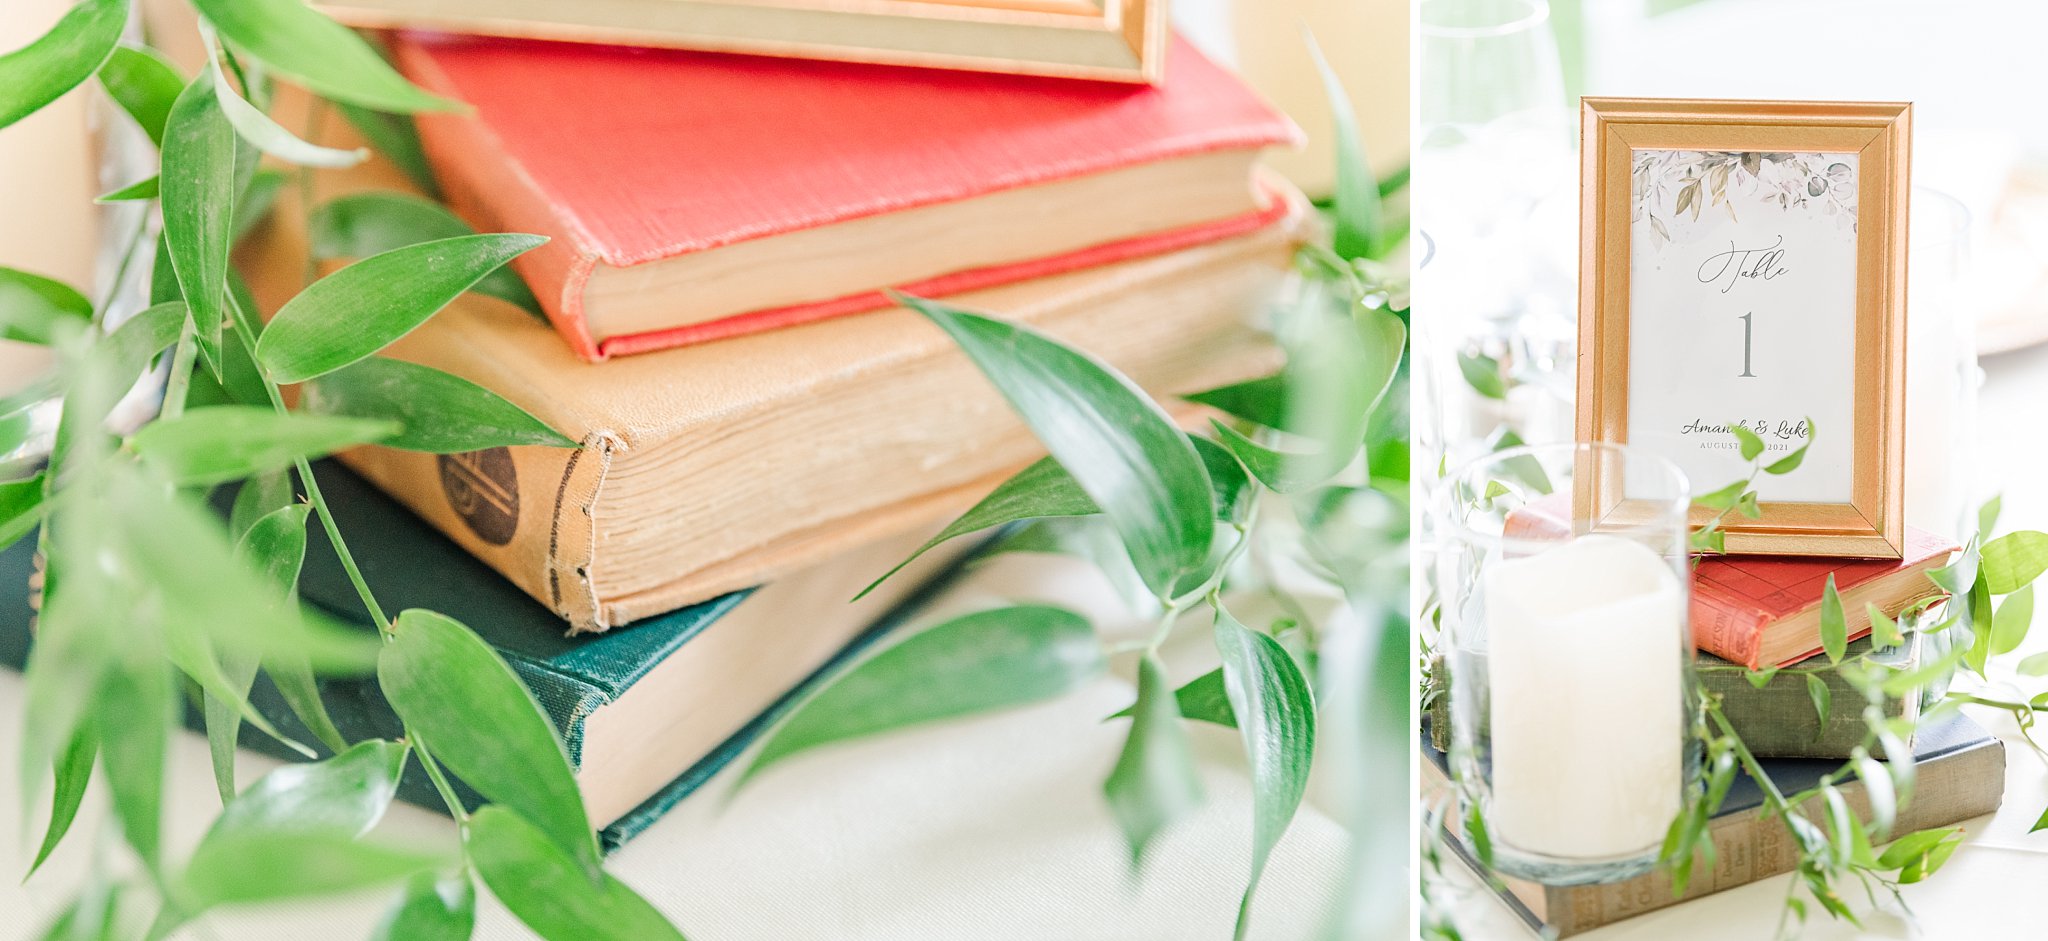 books and greenery on a table